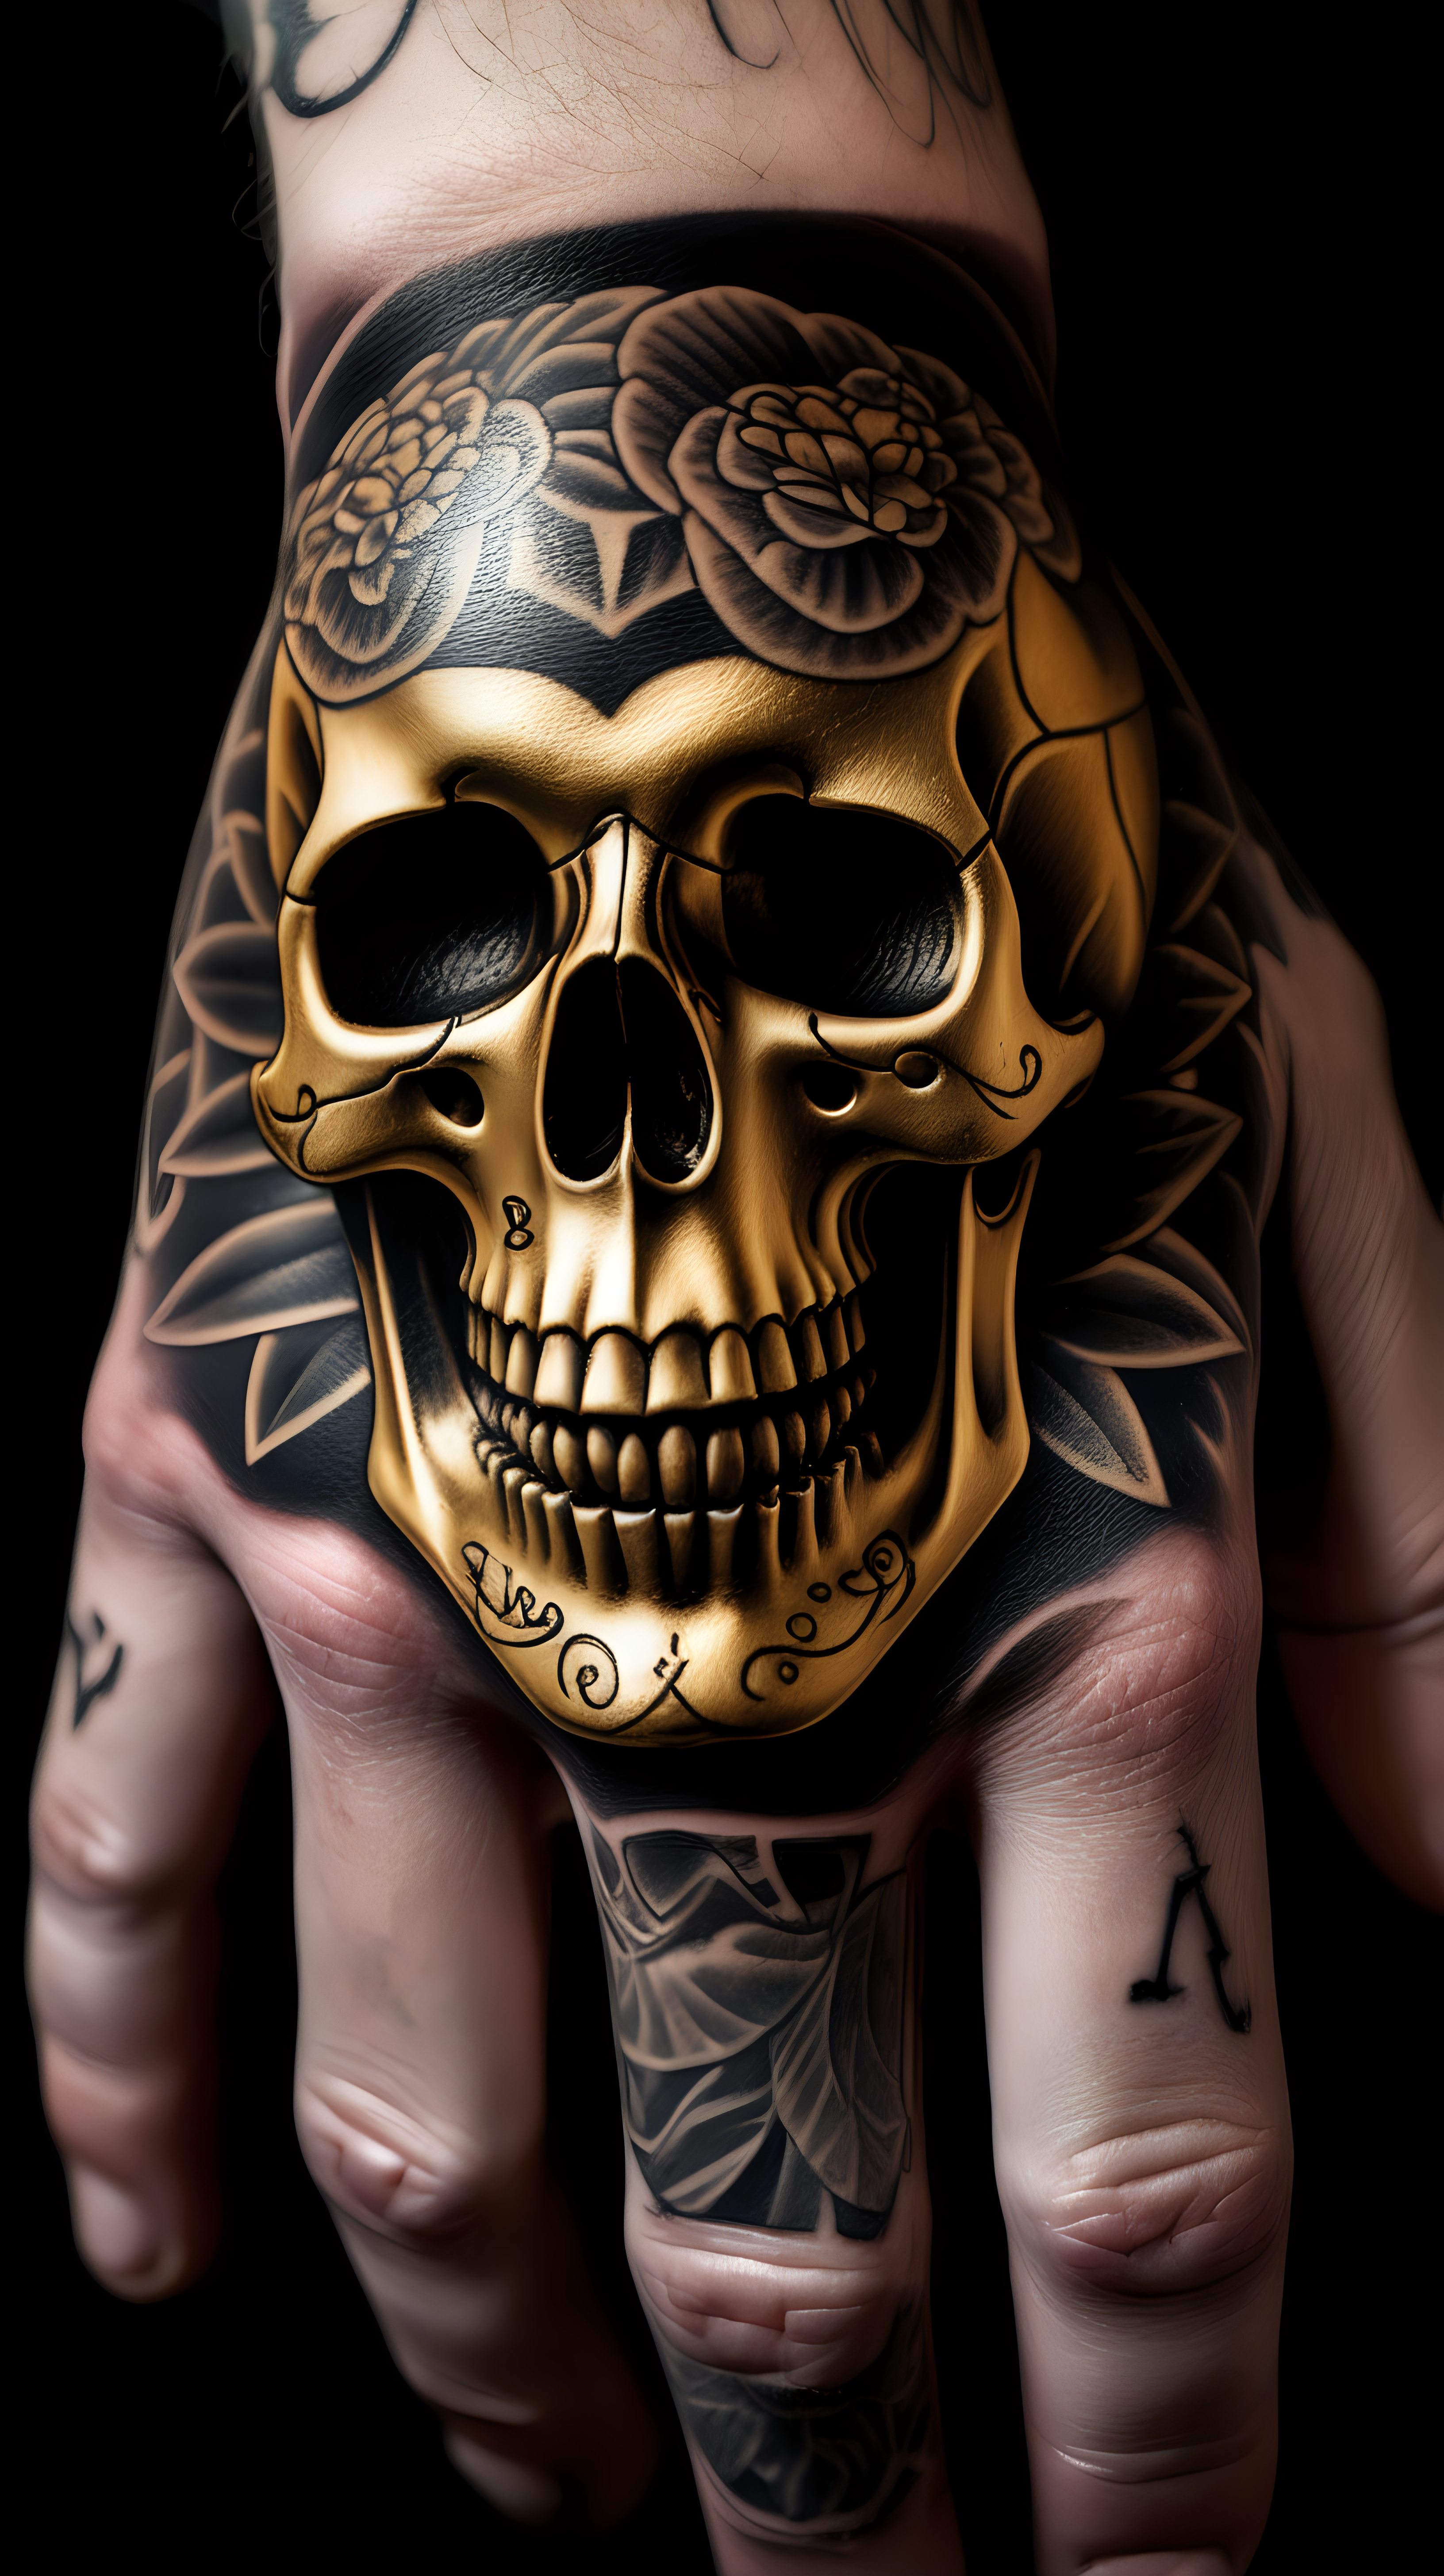 /imagine prompt : An ultra-realistic photograph captured with a canon 5d mark III camera, equipped with an macro lens at F 5.8 aperture setting, The camera is directly in front of the subject, capturing a vintage classic tattoo machine ,a pattern of the skull is engraved on it's golden tattoo grip , grabbed by a wearing black nitrile gloves hand.
the hand is blurred and the focus sets on tattoogun's grip.
Soft spot light gracefully illuminates the subject and golden grip is shining. The background is absolutely black , highlighting the subject.
The image, shot in high resolution and a 16:9 aspect ratio, captures the subject’s  with stunning realism –ar 9:16 –v 5.2 –style raw
